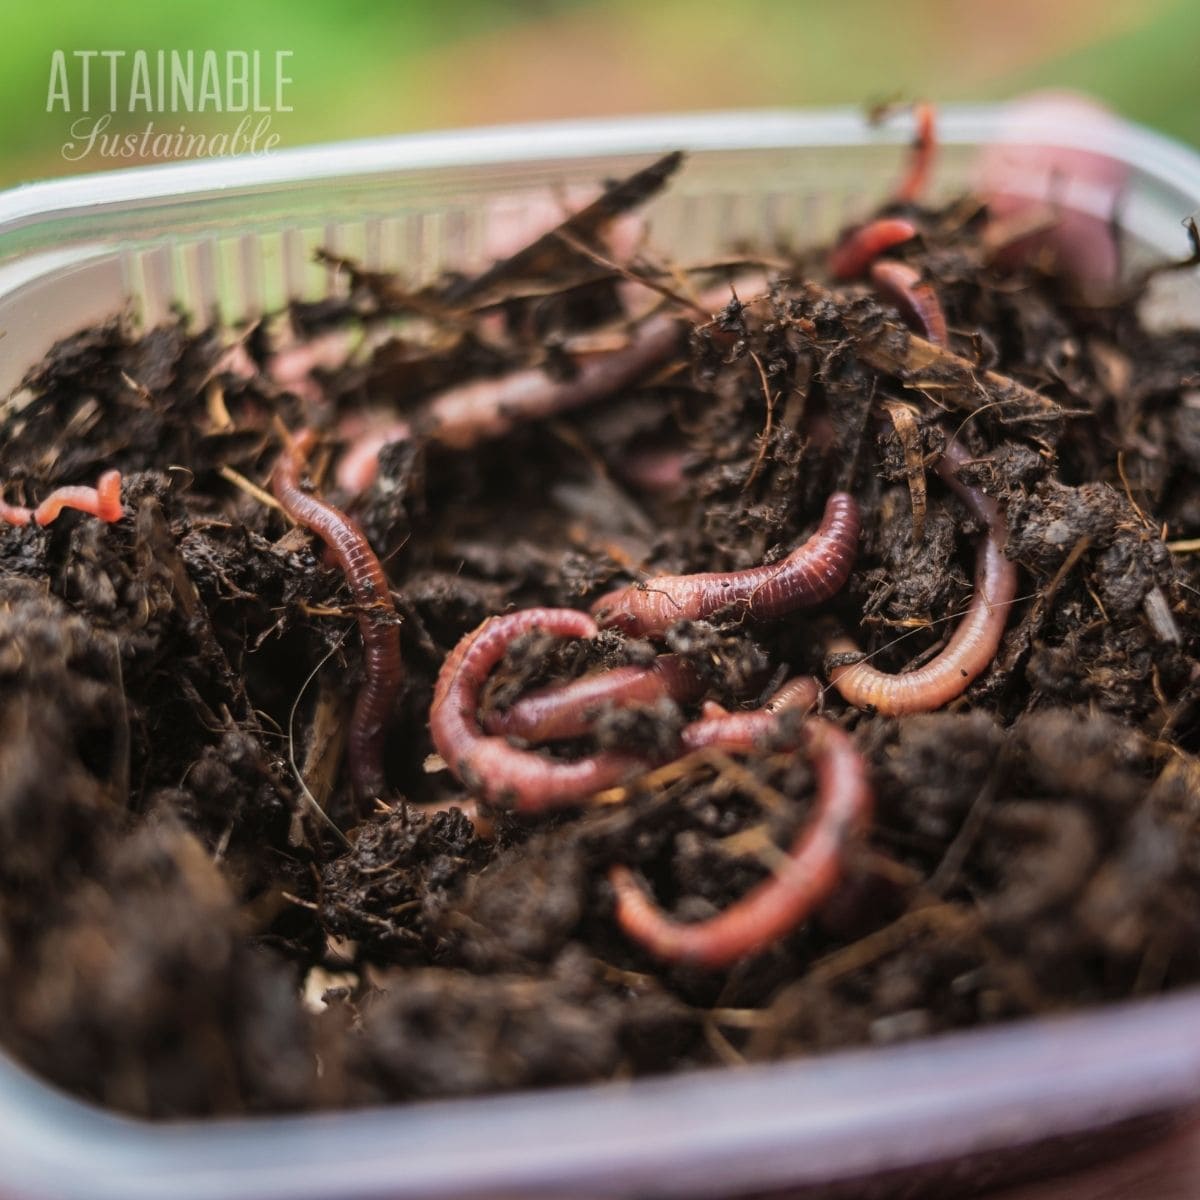 composting worms in castings.